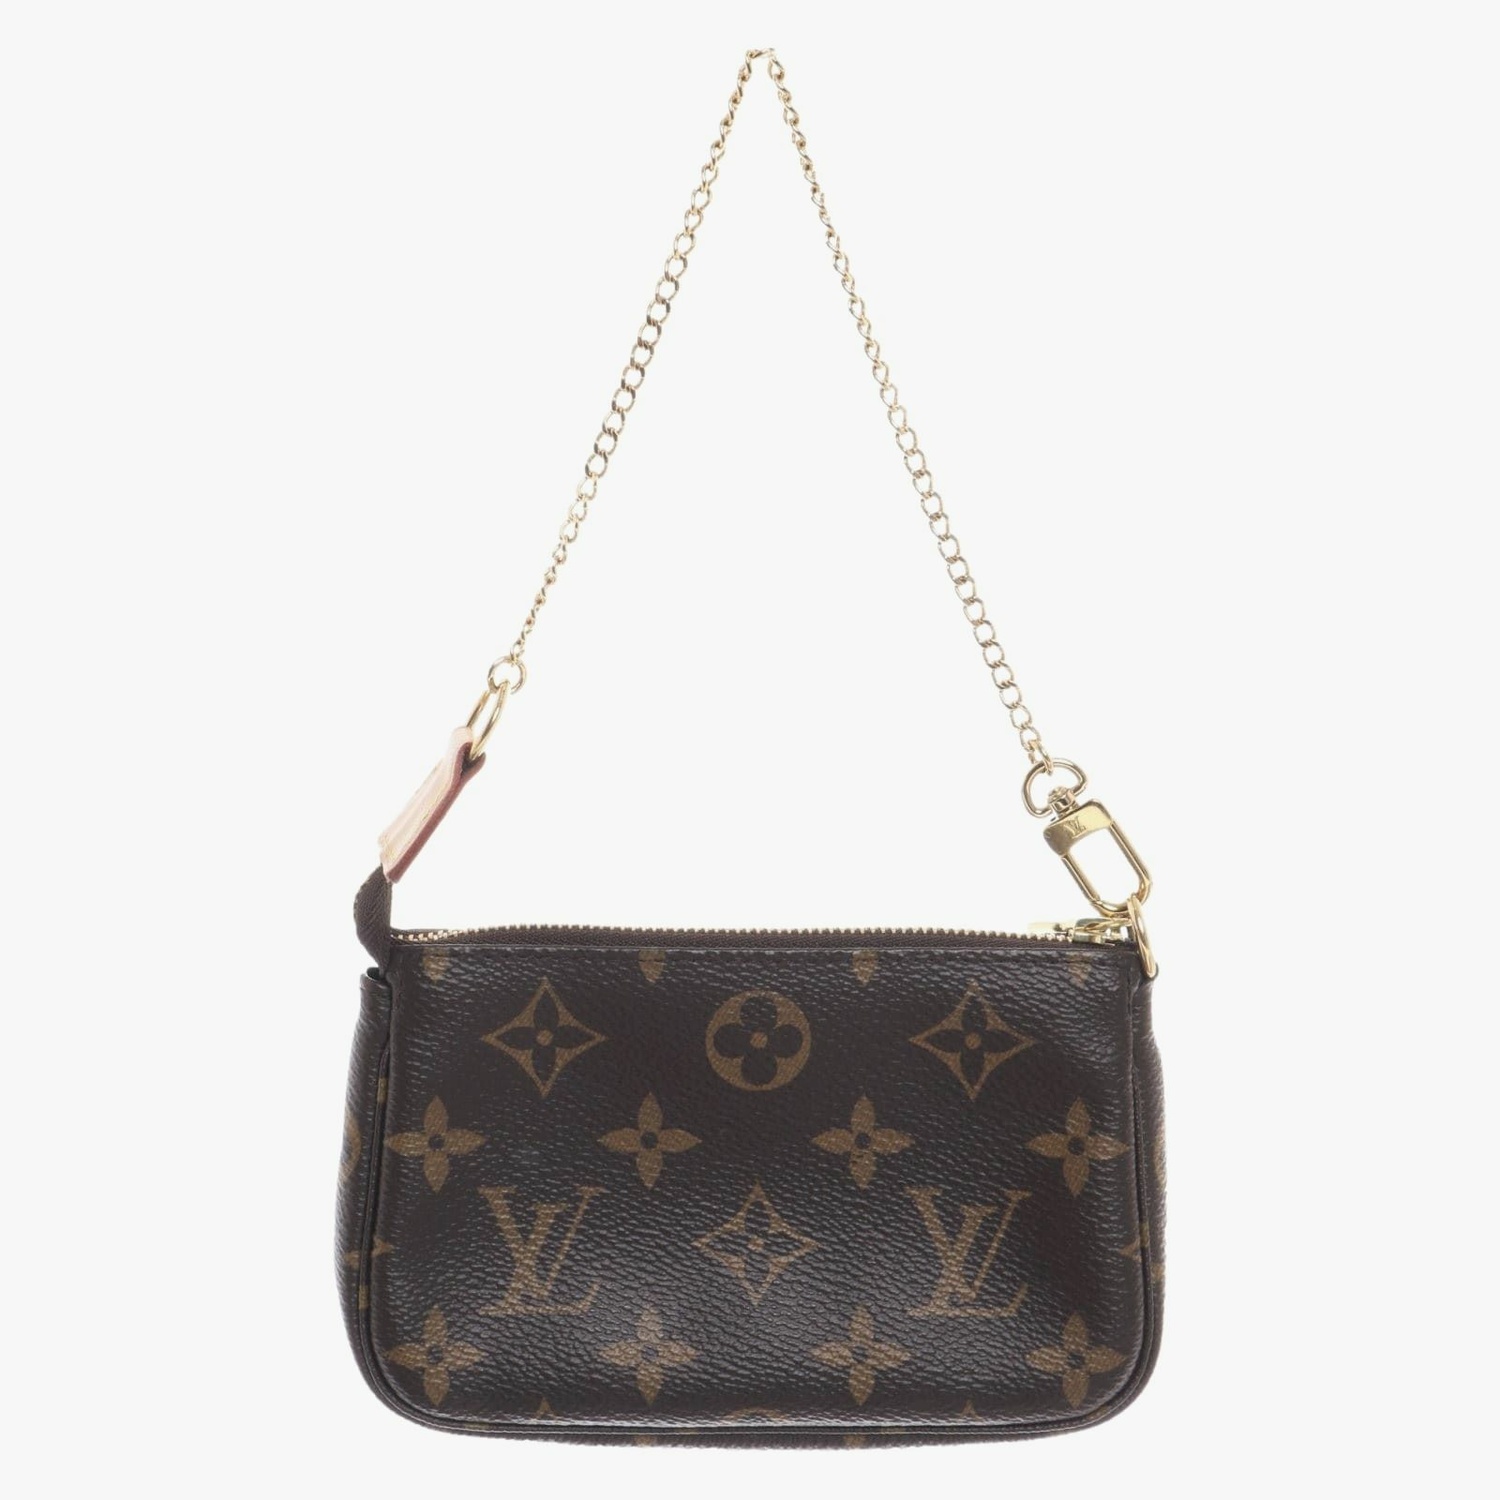 Leather Baguette Handbag Louis Vuitton - One size, buy pre-owned at 670 EUR